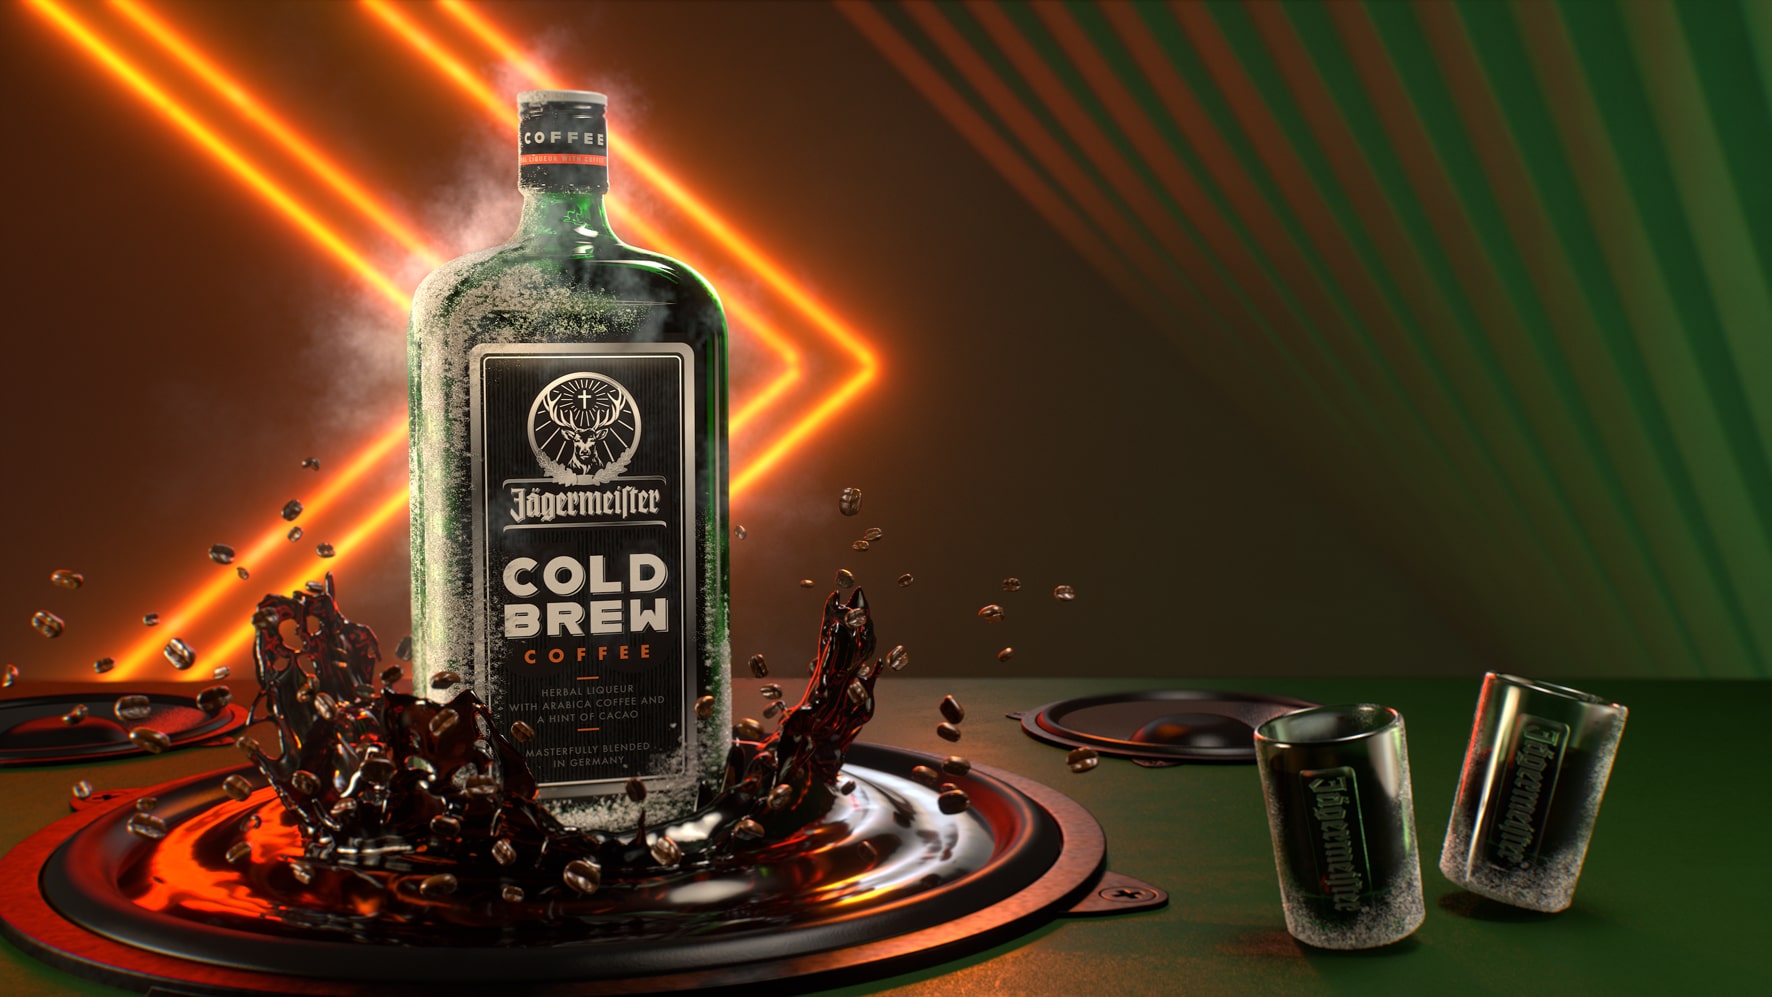 Jägermeister Cold Brew Coffee launches in GTR exclusively with Gebr. Heinemann A new beat in the shot category